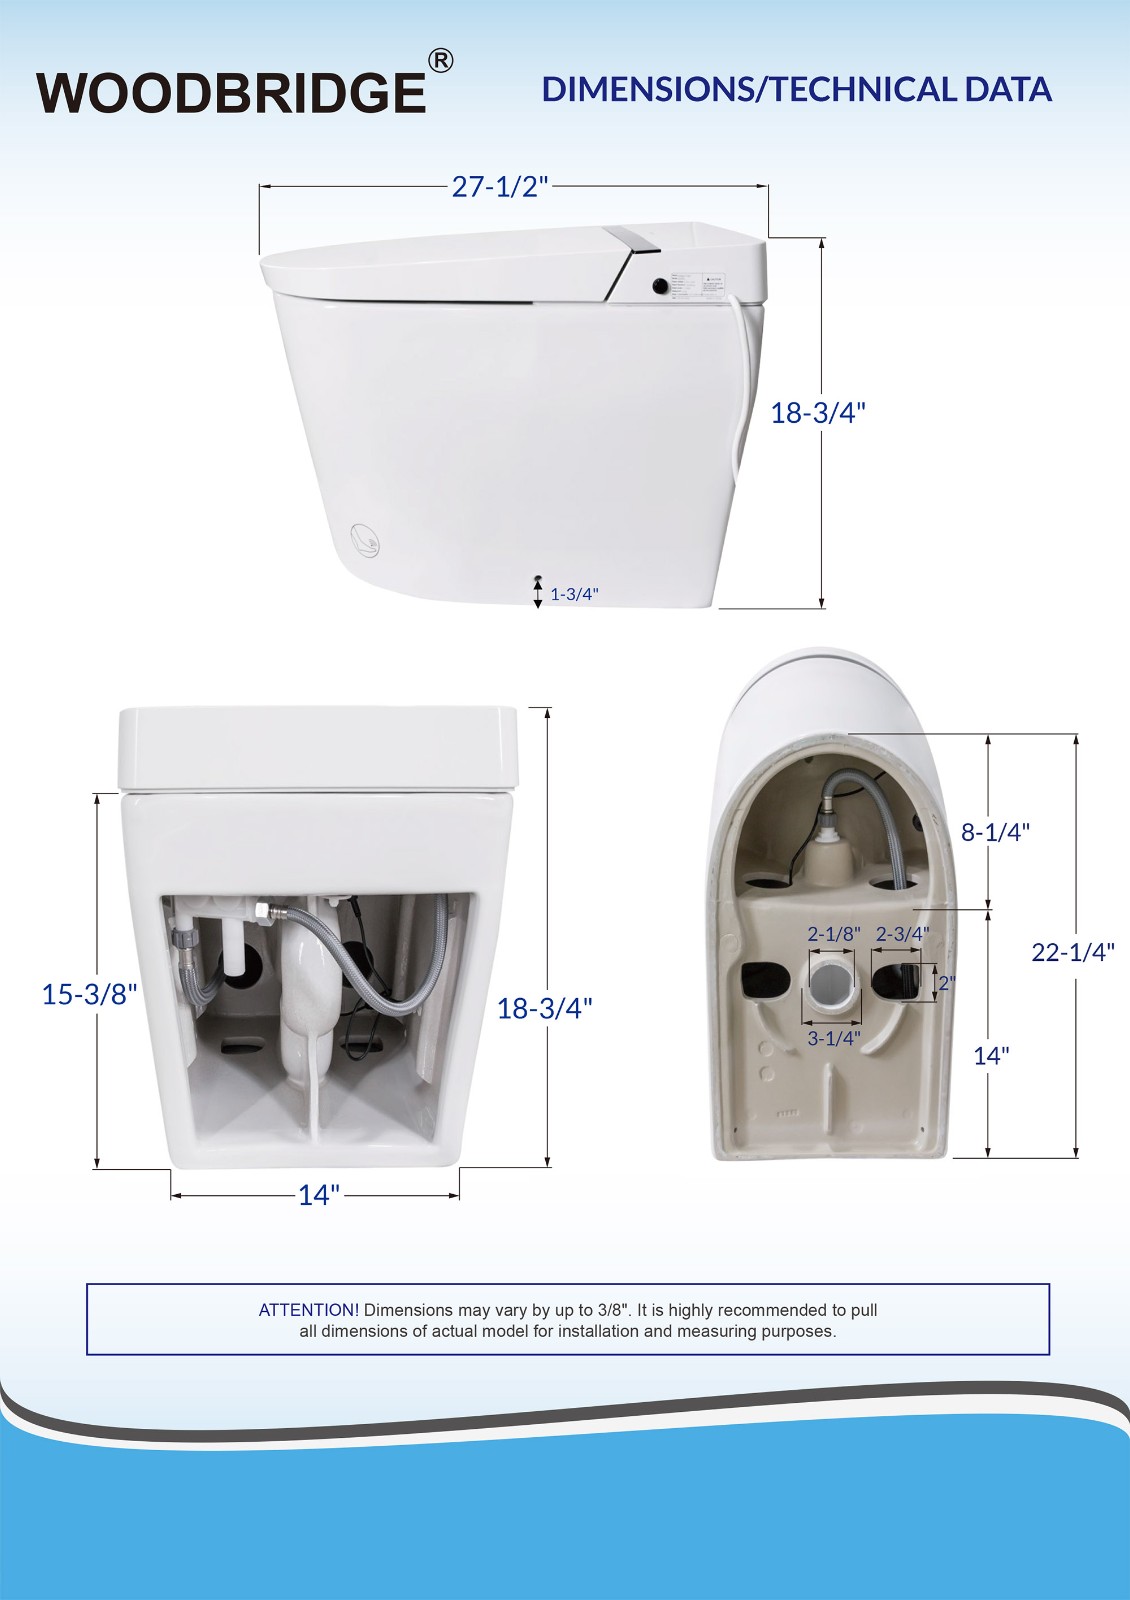  WOODBRIDGE B0990S One Piece Elongated Smart Toilet Bidet with Massage Washing, Auto Open and Close Seat and Lid, Auto Flush, Heated Seat and Integrated Multi Function Remote Control, White_2114